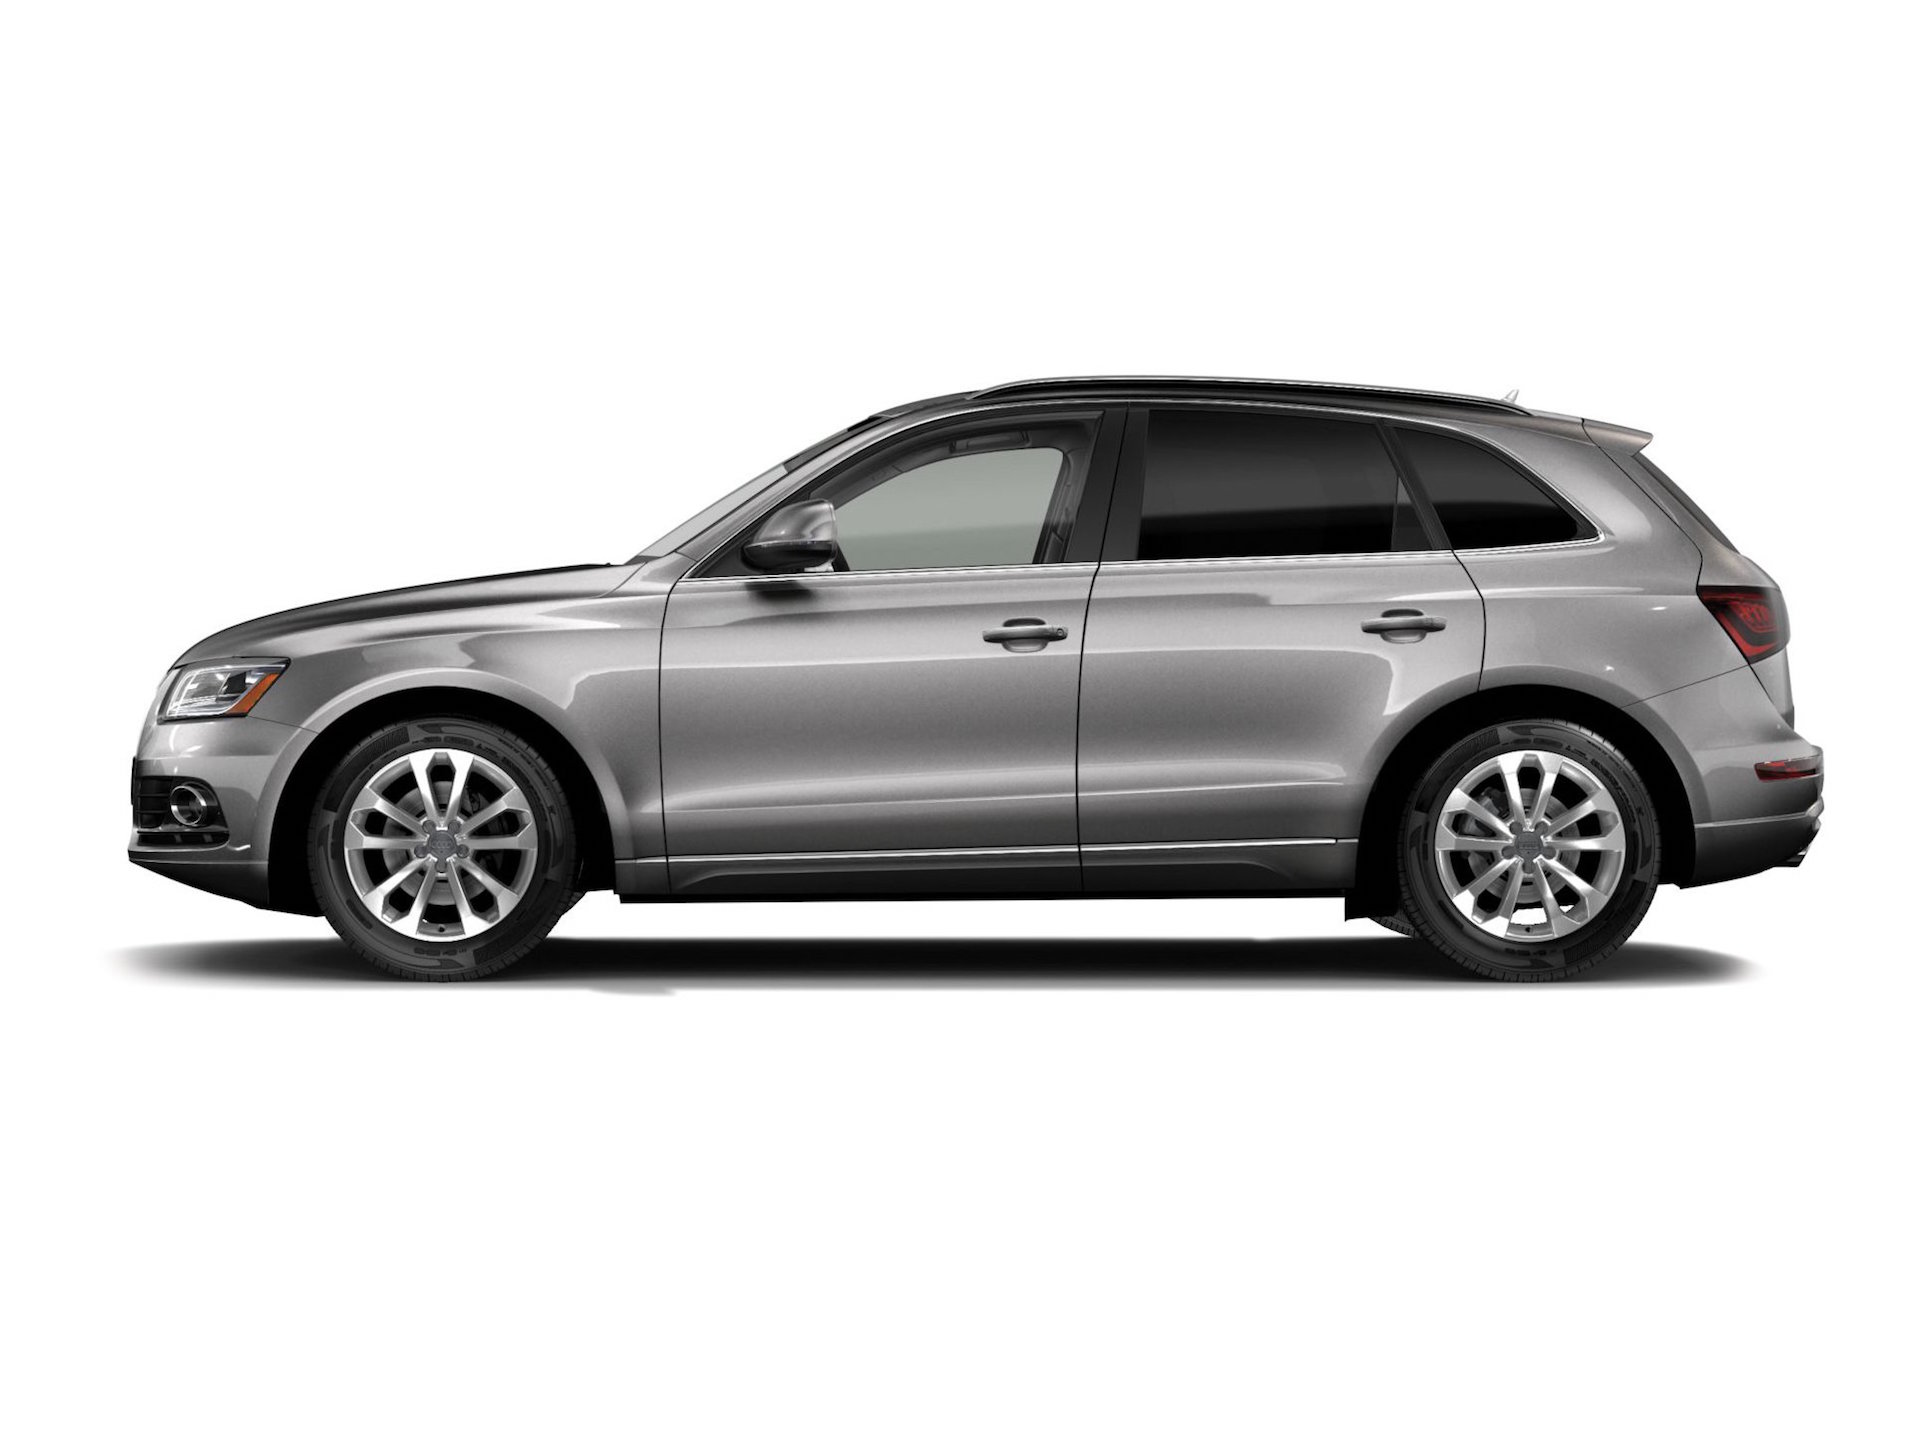 2017 Audi Q5 prices and expert review - The Car Connection